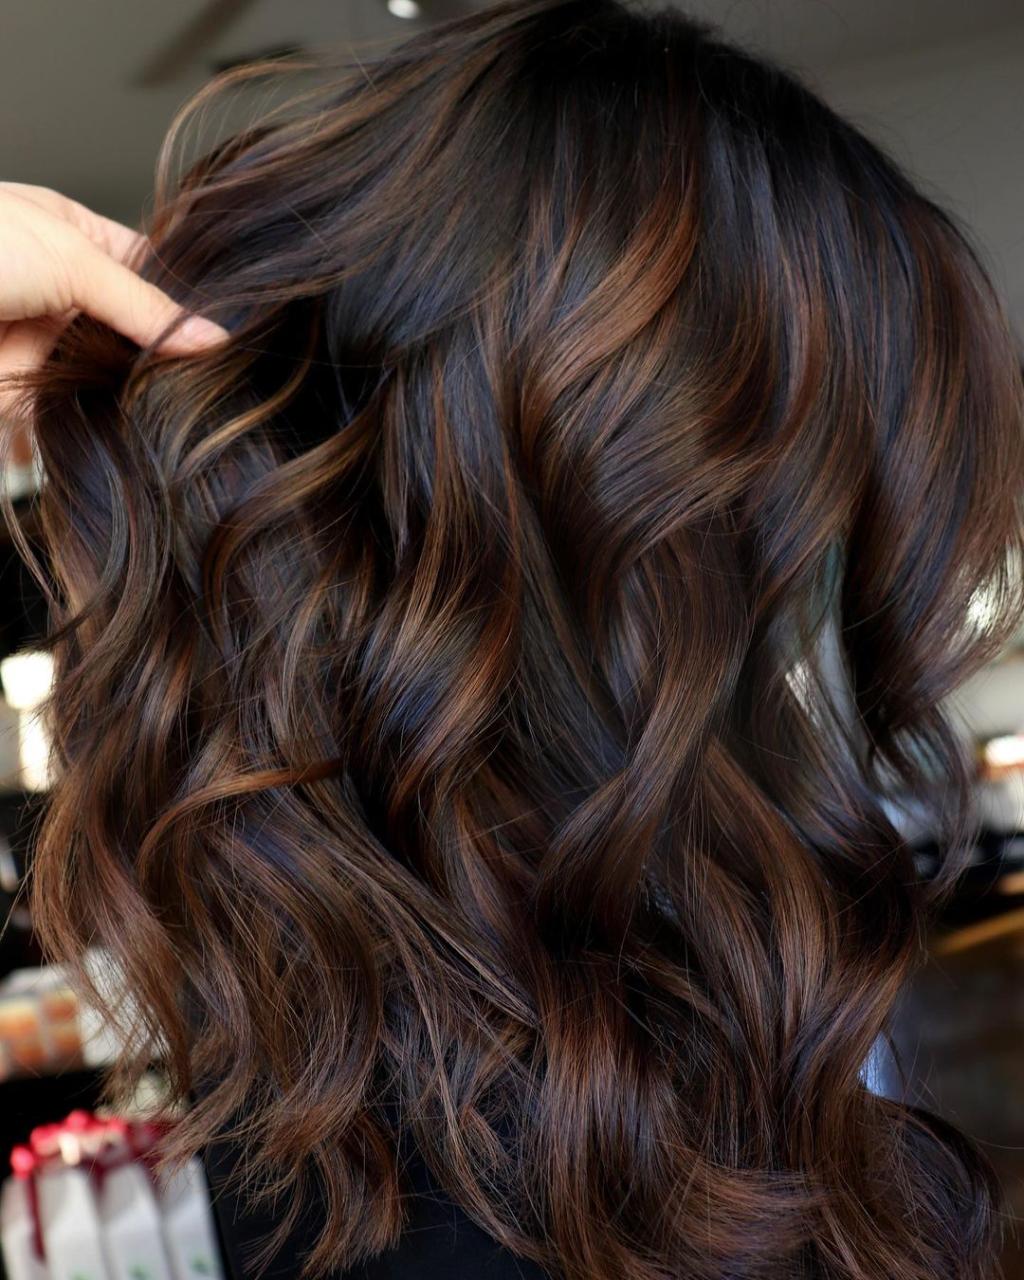 Hot Chocolate Hair Color with Highlights: 5 Stunning Looks To Try Now